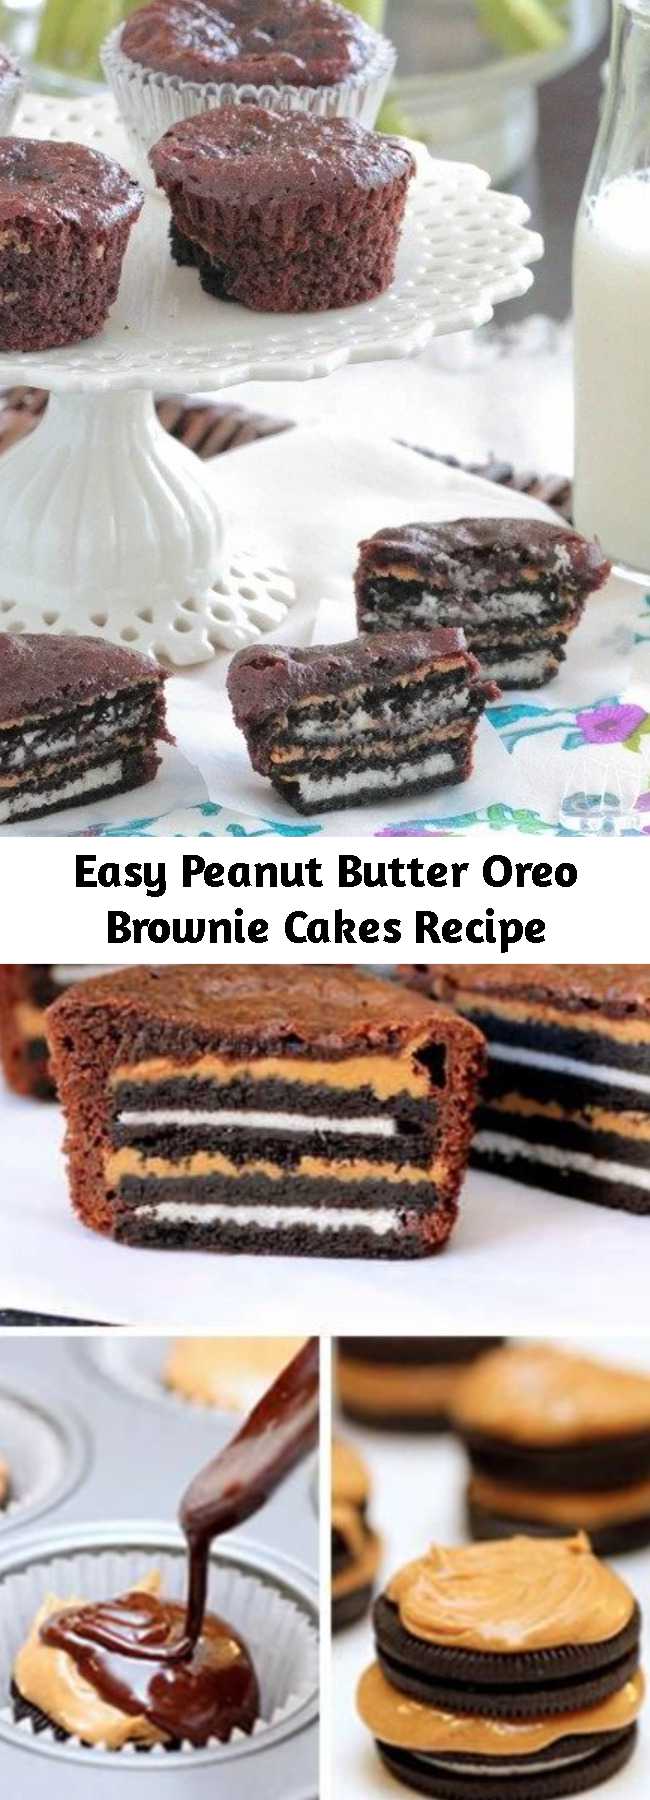 Easy Peanut Butter Oreo Brownie Cakes Recipe - These Peanut Butter Oreo Brownie Cakes are heaven in a bite! Stuffed with peanut butter and oreo cookies, this easy brownies recipe is flavorful and delicious!